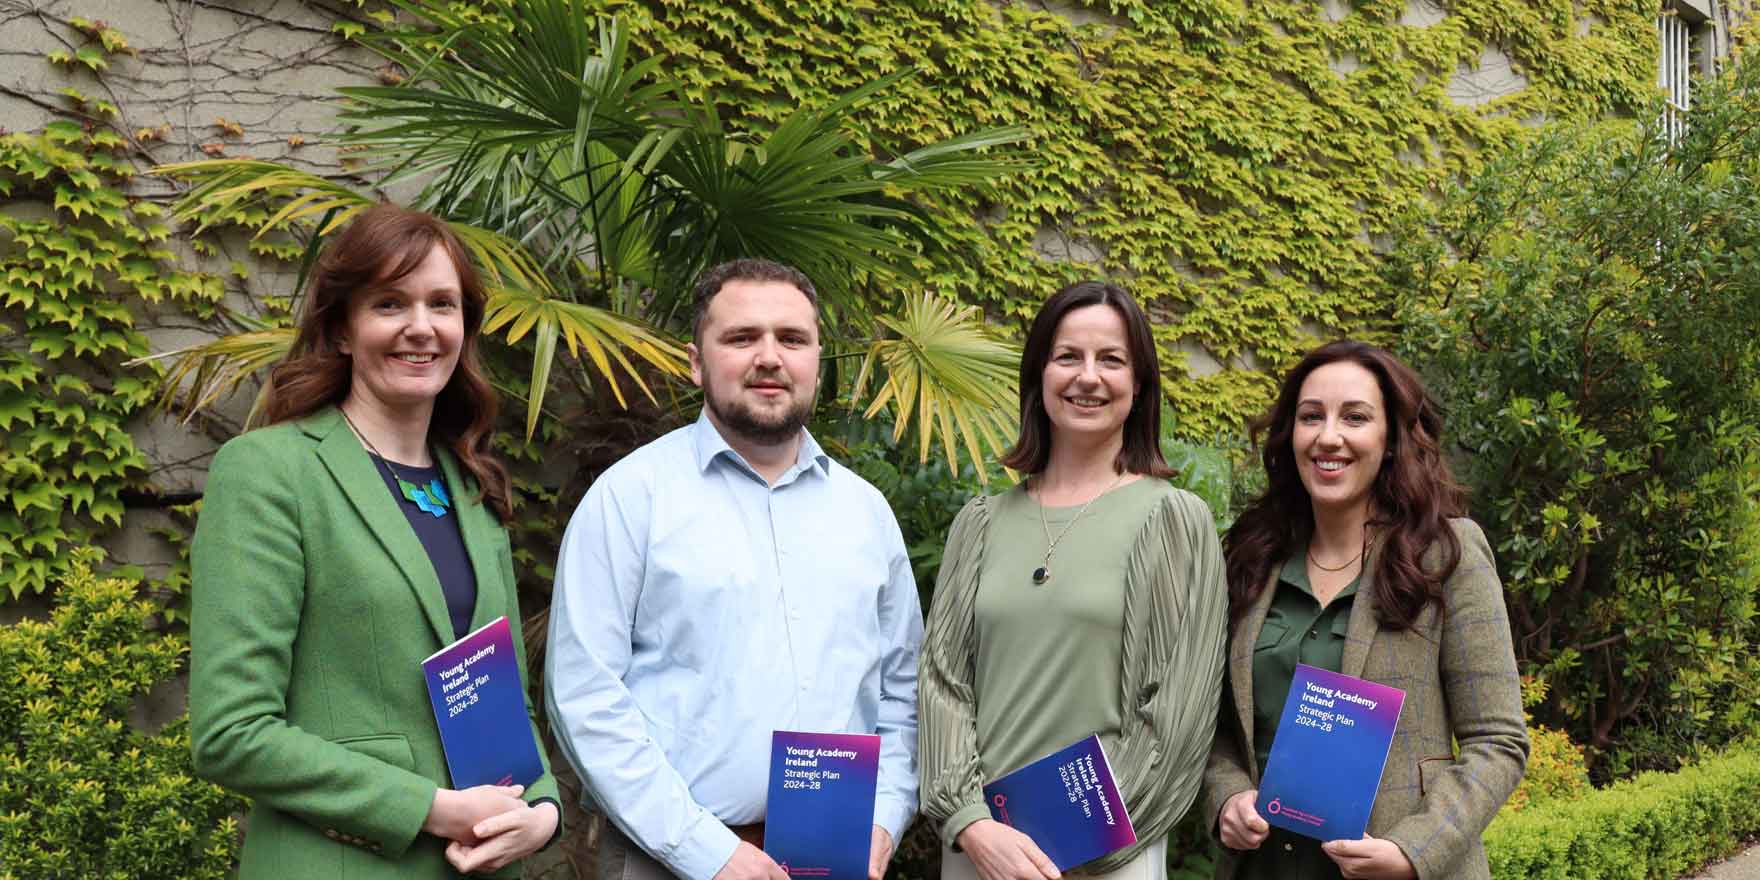 Four members of Young Academy Ireland (YAI), three woman and one man, holding printed copies of the YAI strategic plan, standing in front of a wall, covered in greenery